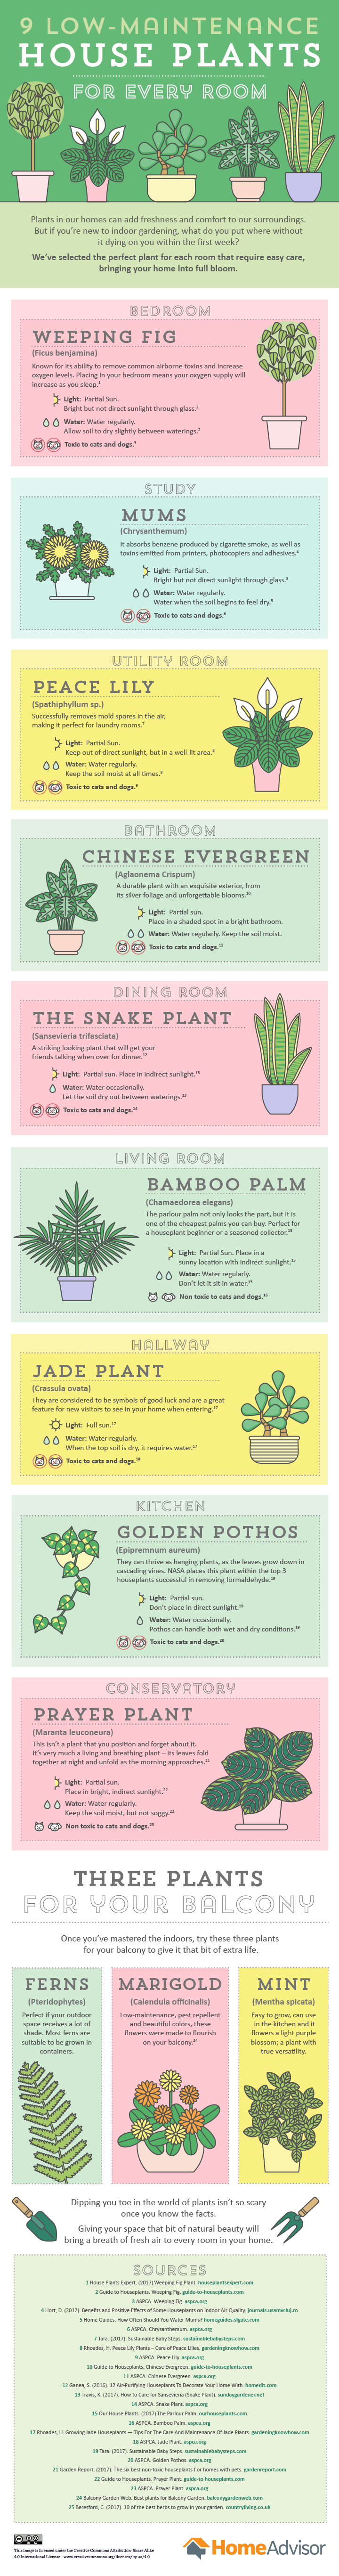 9 Low Maintenance House Plants For Every Room